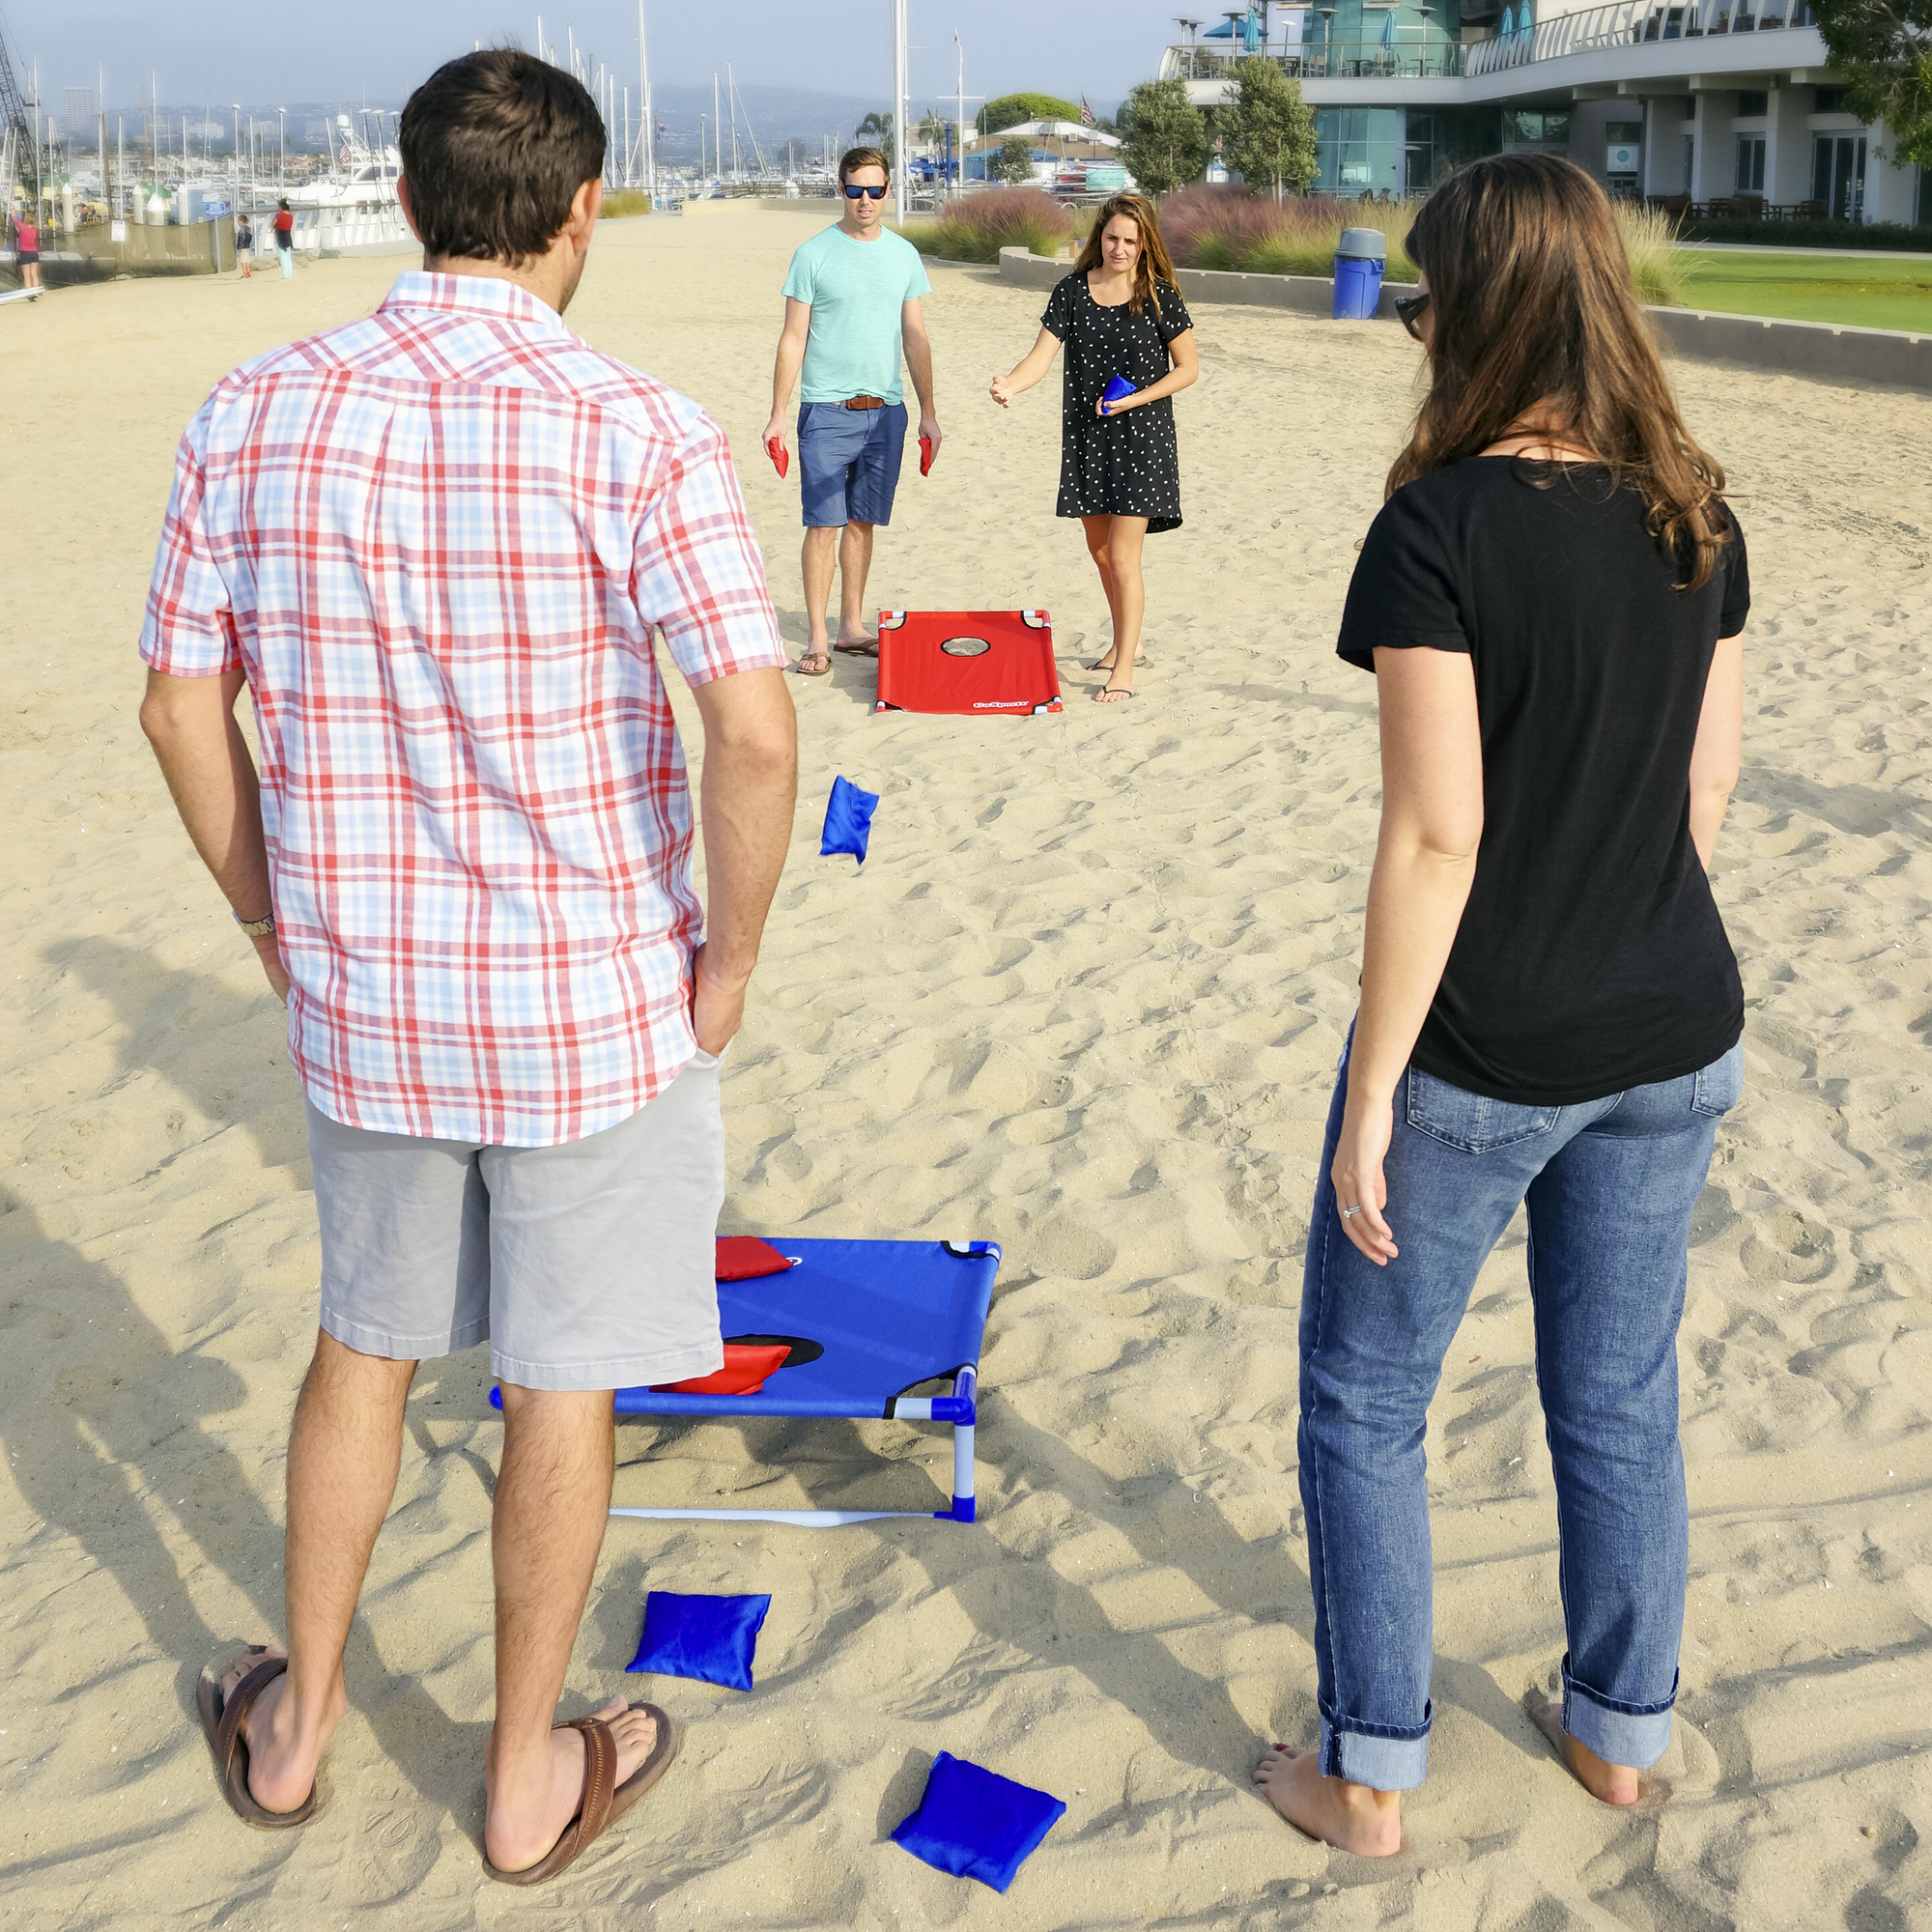 GoSports Foldable PVC Framed Cornhole Game Set with 8 Bean Bags and Portable Carrying Case - image 3 of 5